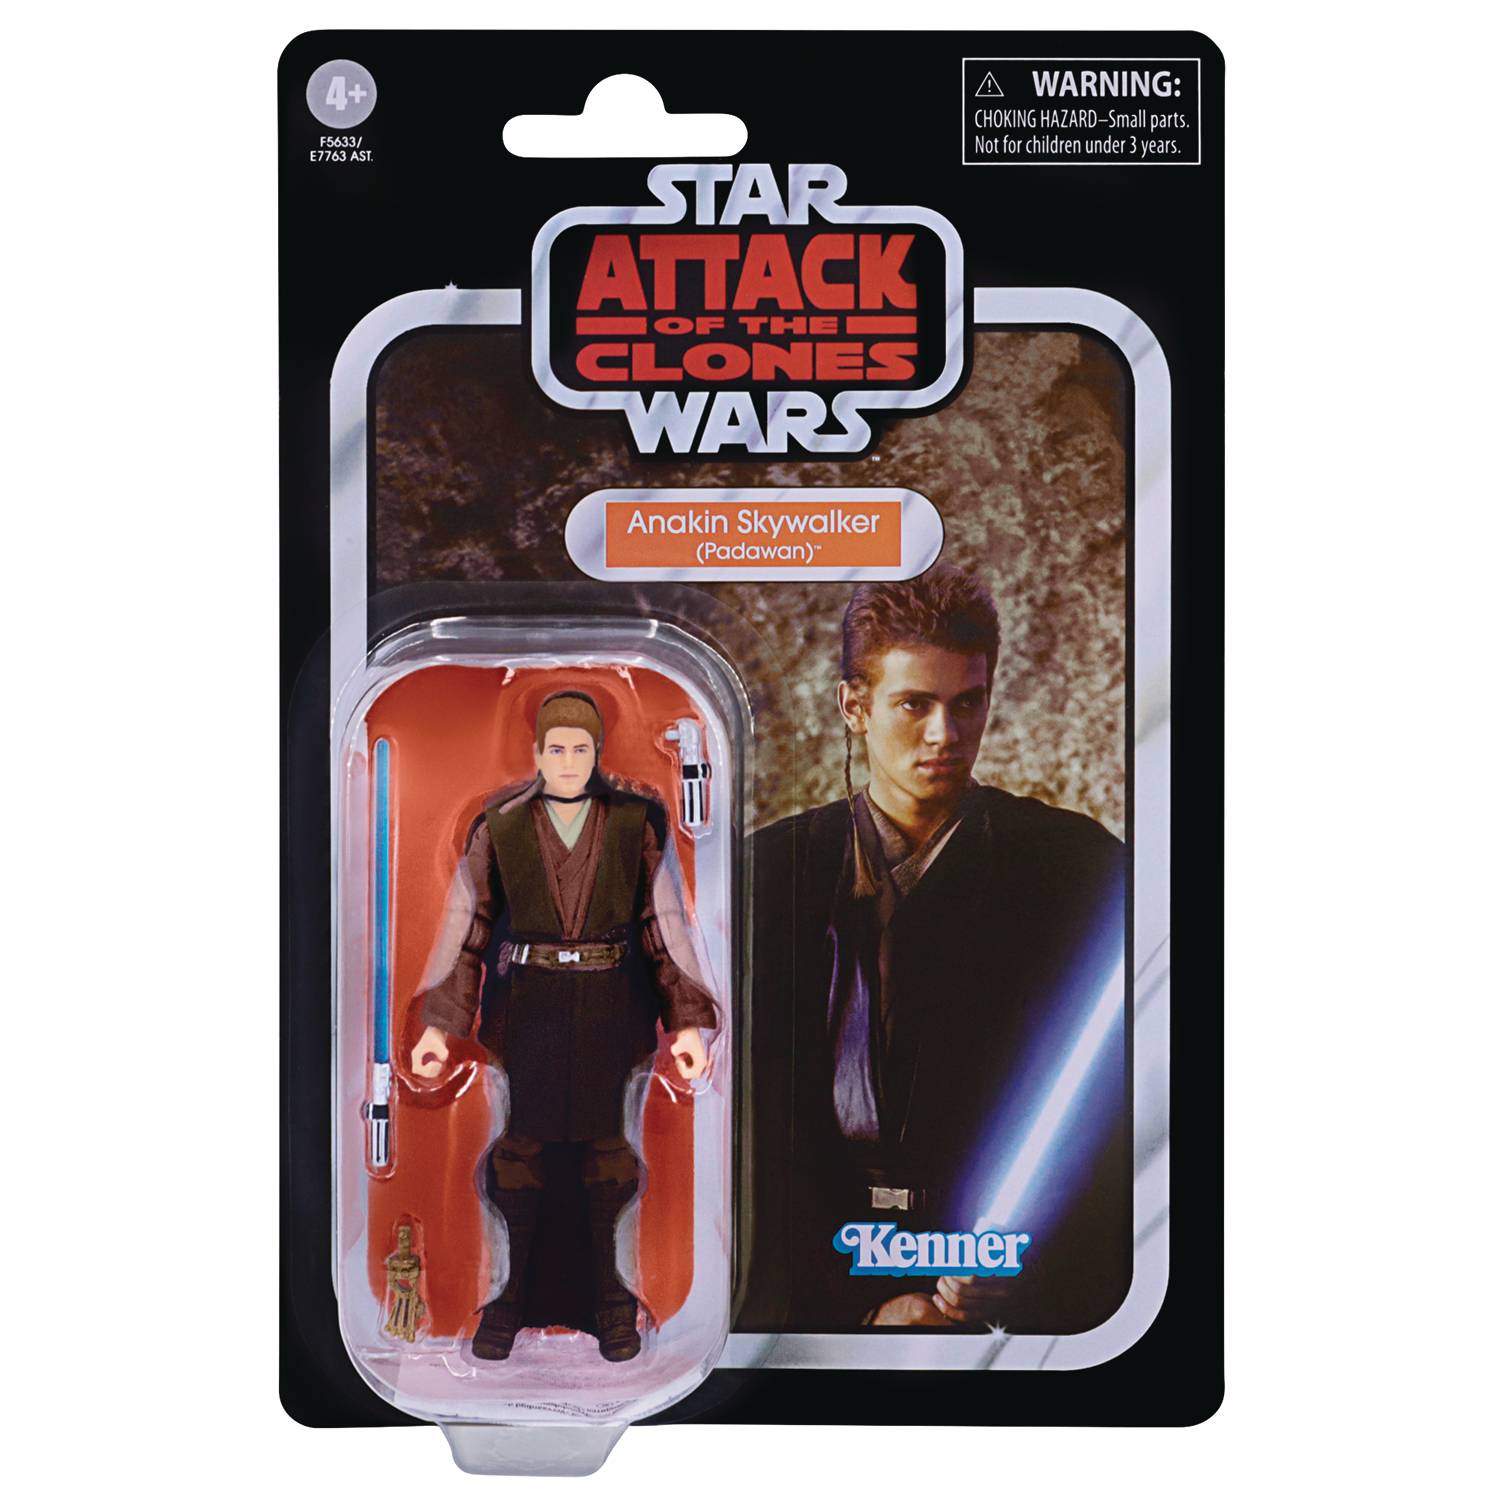 Star Wars - The Vintage Collection - Attack of the Clones - Padawan Anakin Skywalker 3.75inch Action Figure